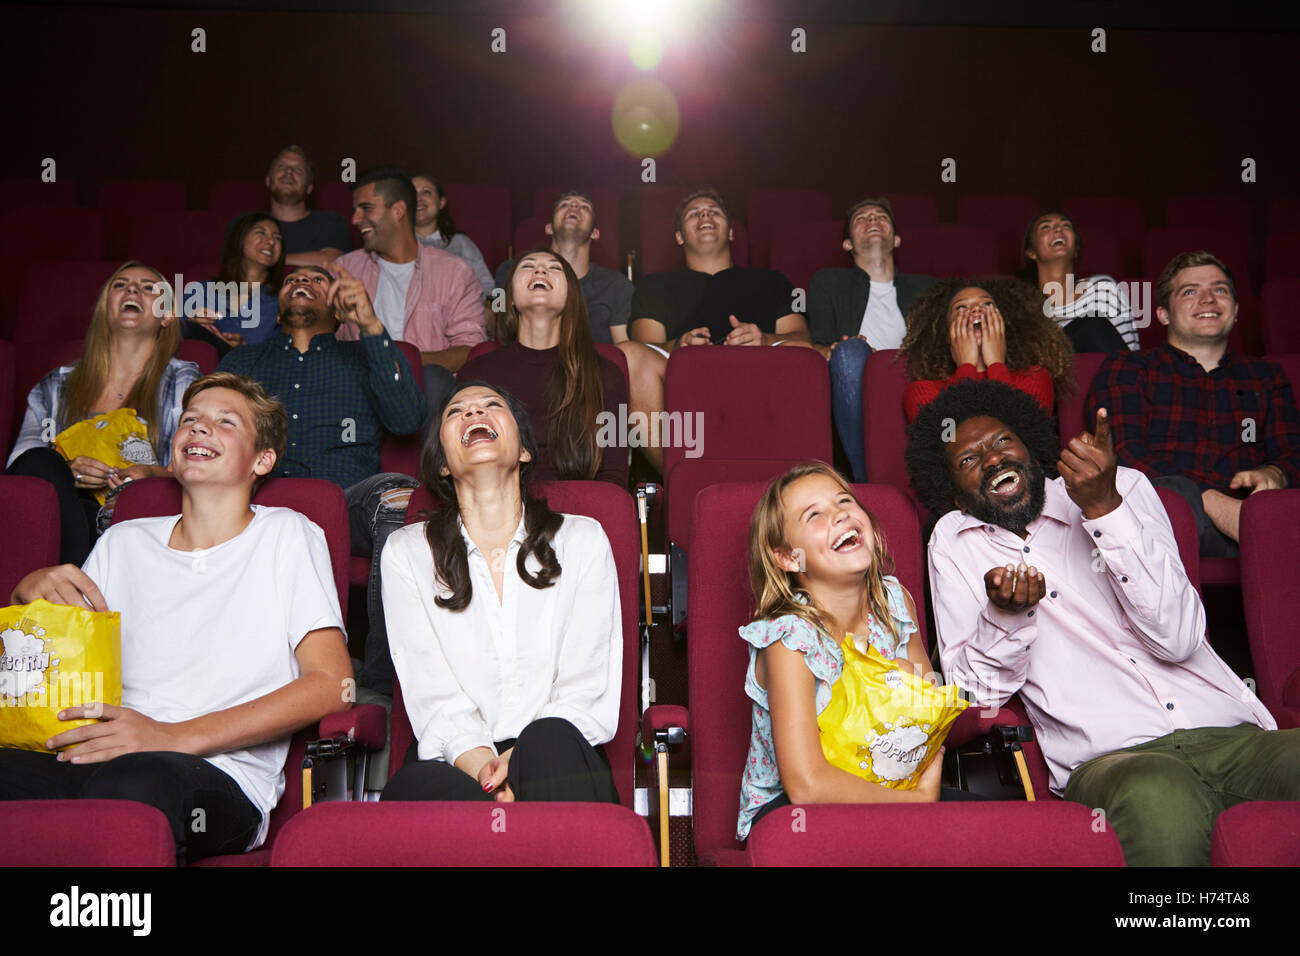 Audience In Cinema Watching Comedy Film Stock Photo